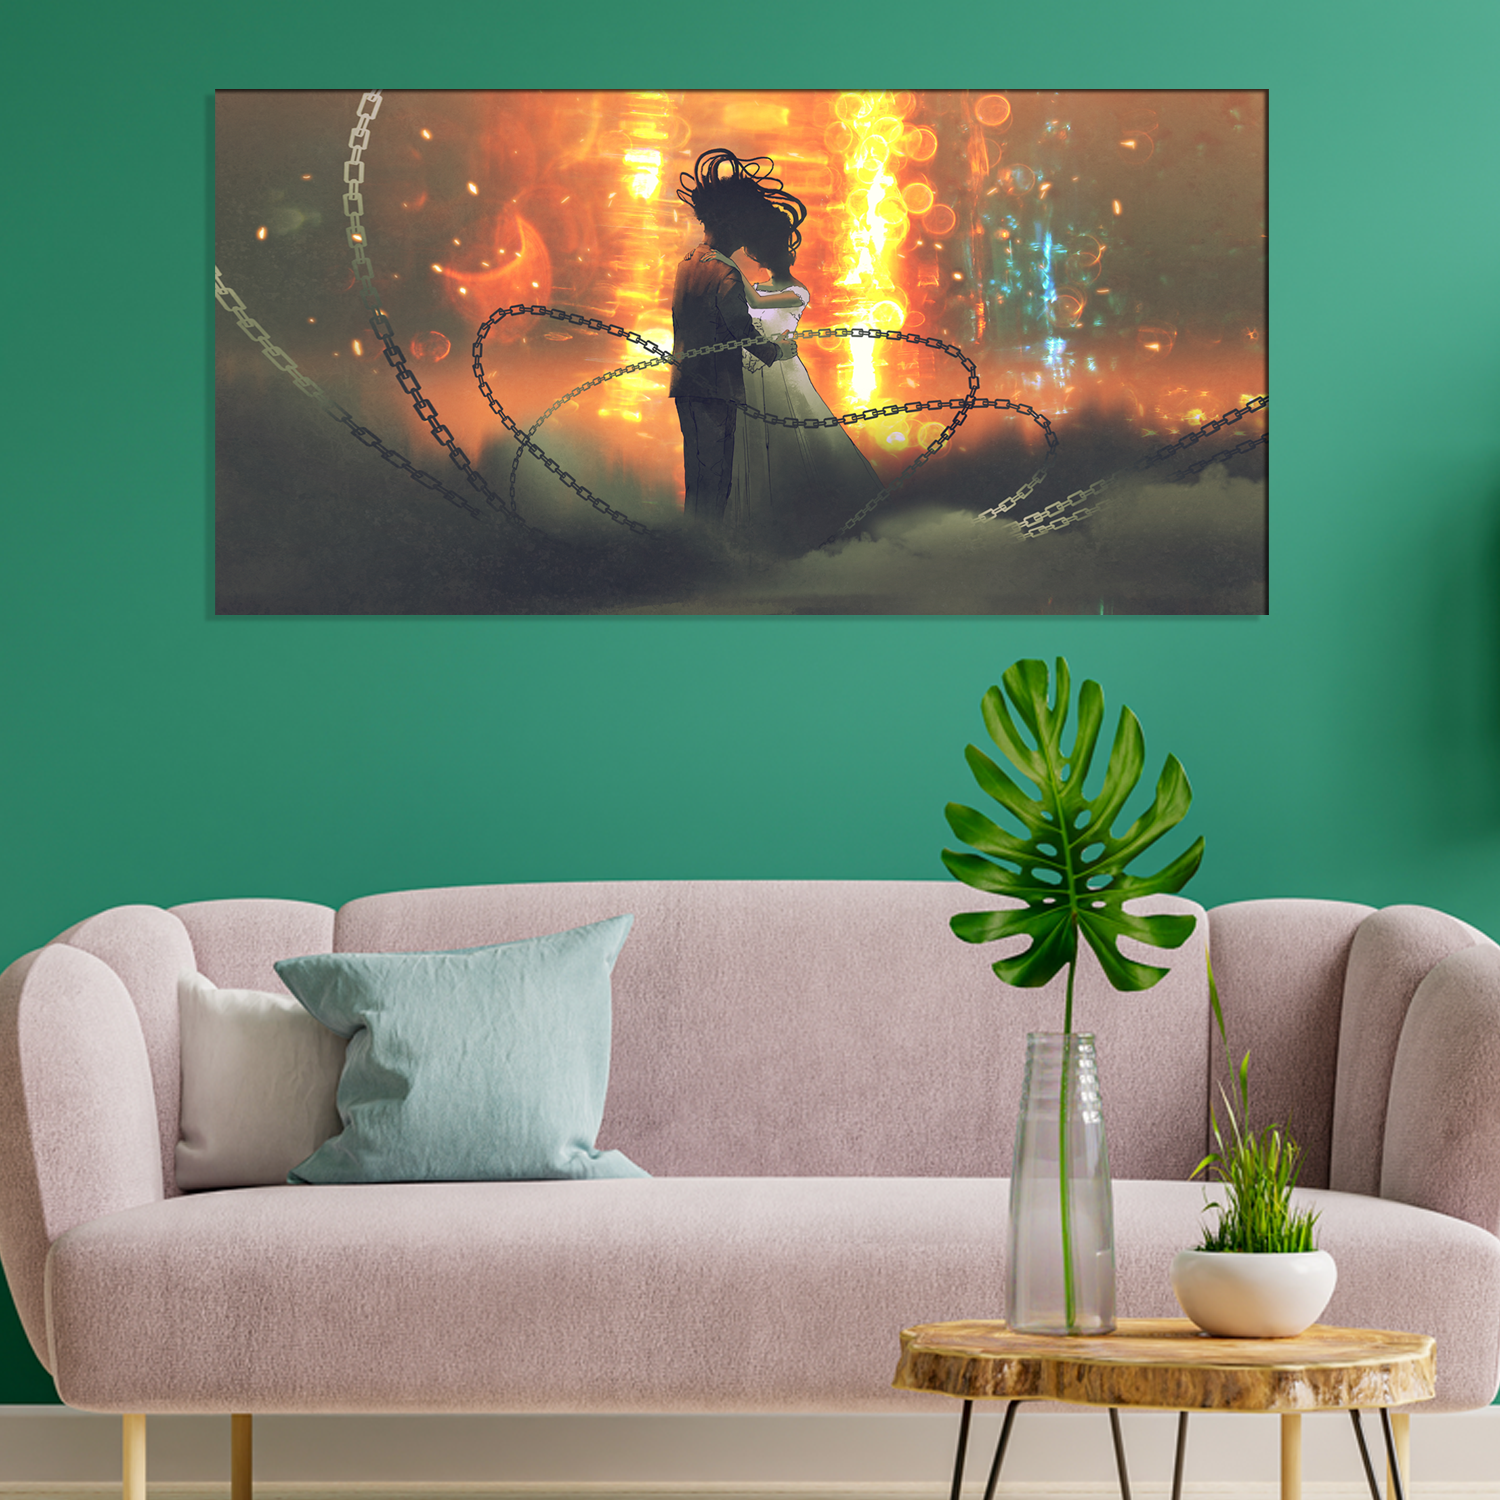 Wedding couple abstract Canvas Print Wall Painting